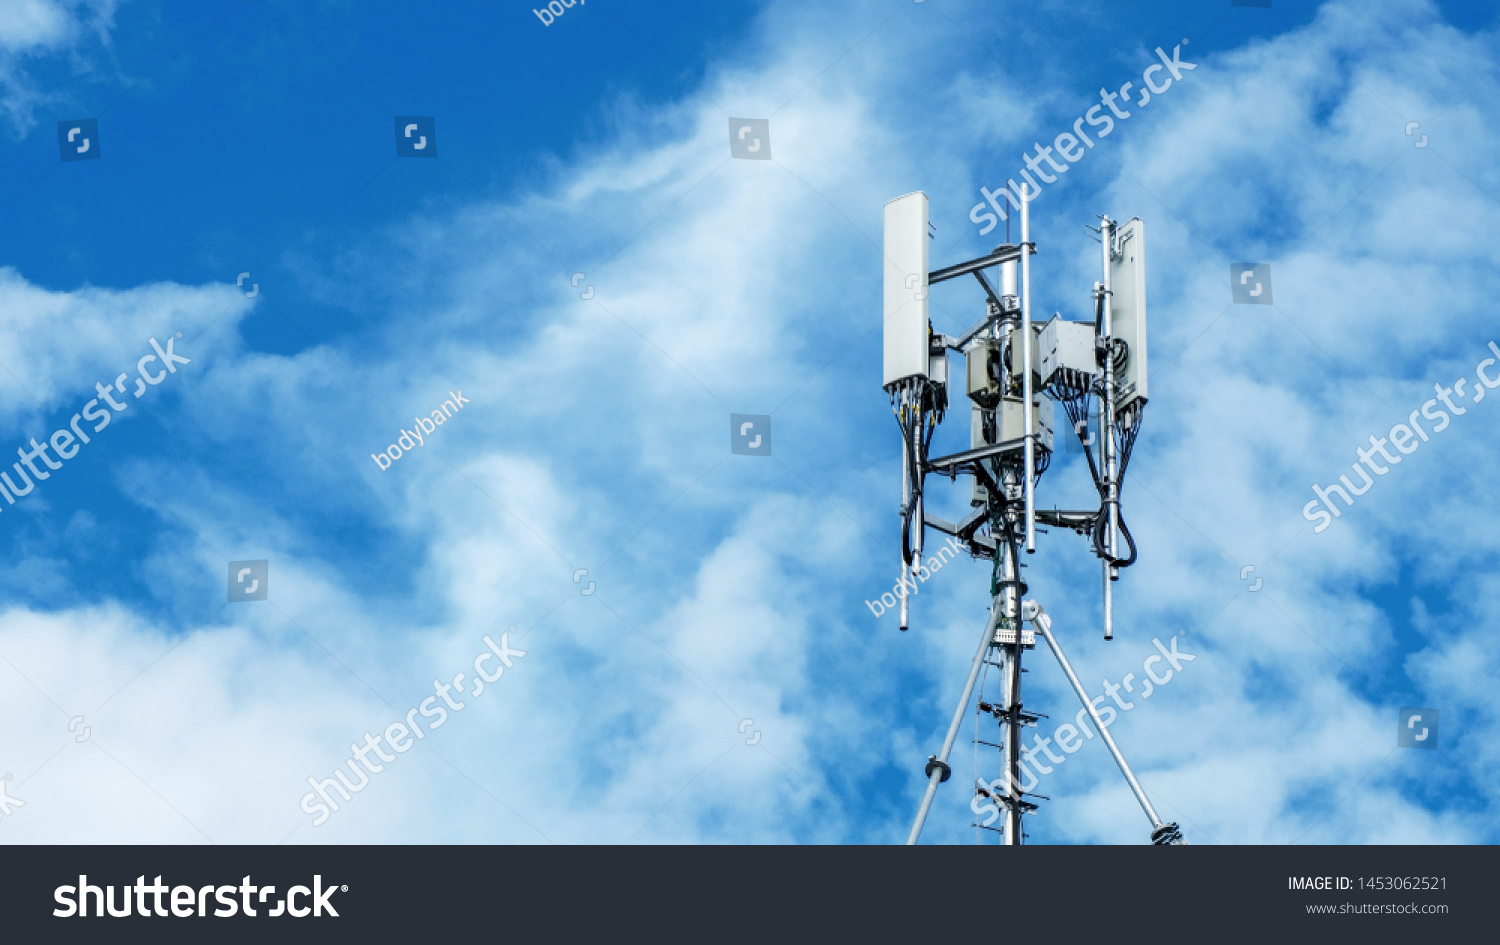 Technology on the top of the telecommunication. Cellular phone antennas on a building roof.Telecommunication mast television antennas.Receiving and transmitting stations. #1453062521